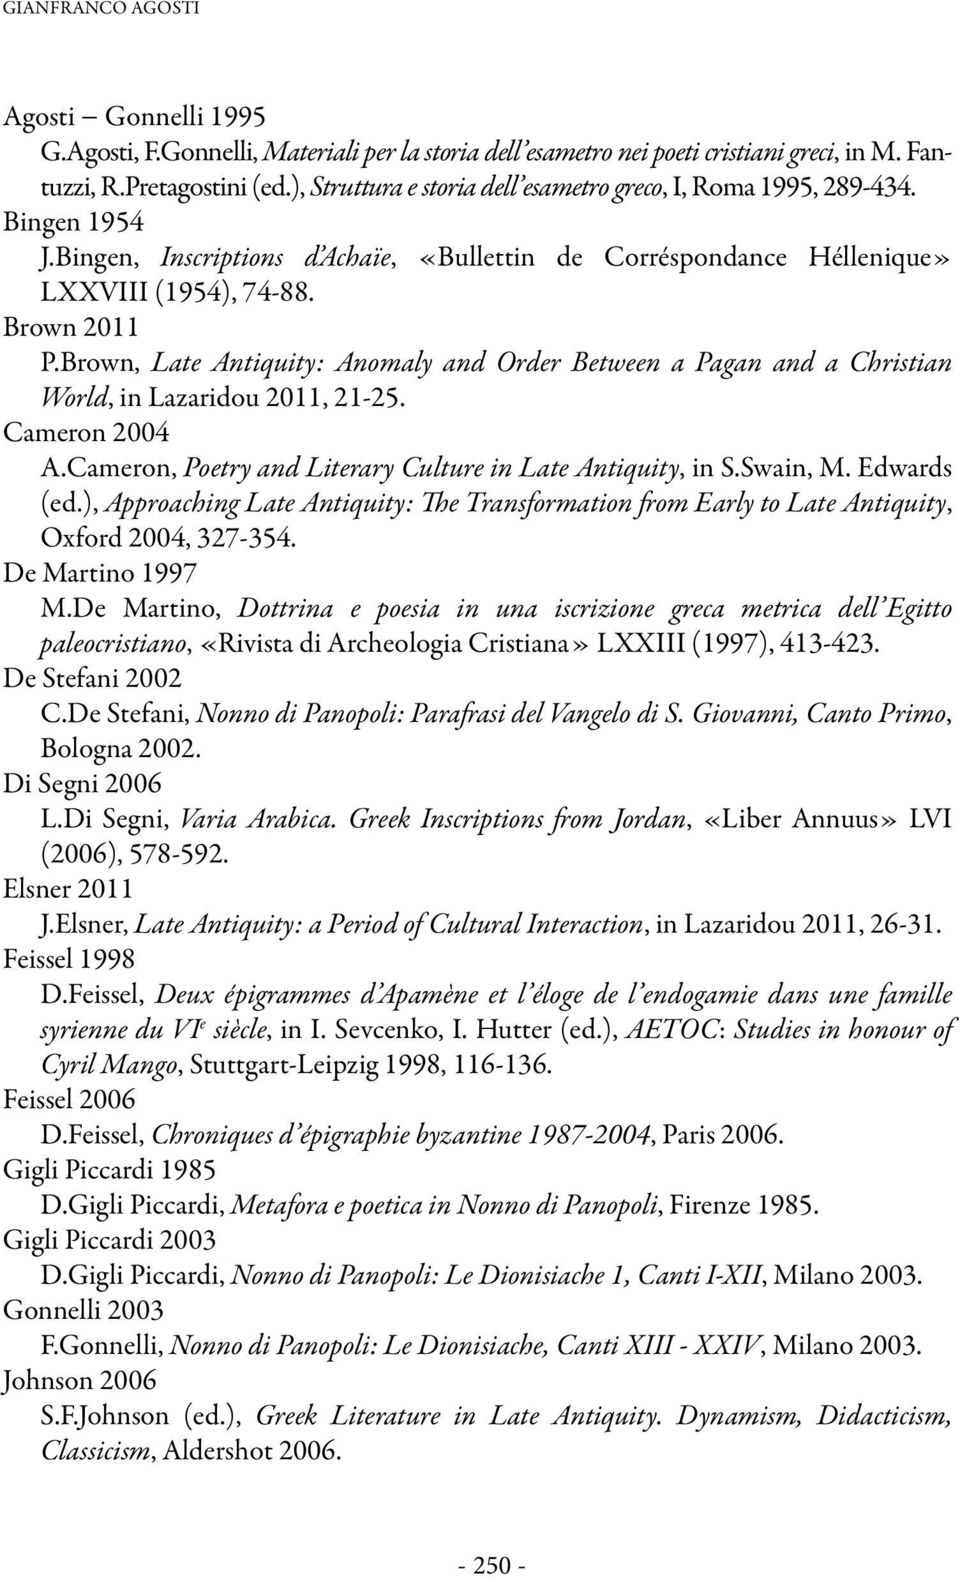 Brown, Late Antiquity: Anomaly and Order Between a Pagan and a Christian World, in Lazaridou 2011, 21-25. Cameron 2004 A.Cameron, Poetry and Literary Culture in Late Antiquity, in S.Swain, M.